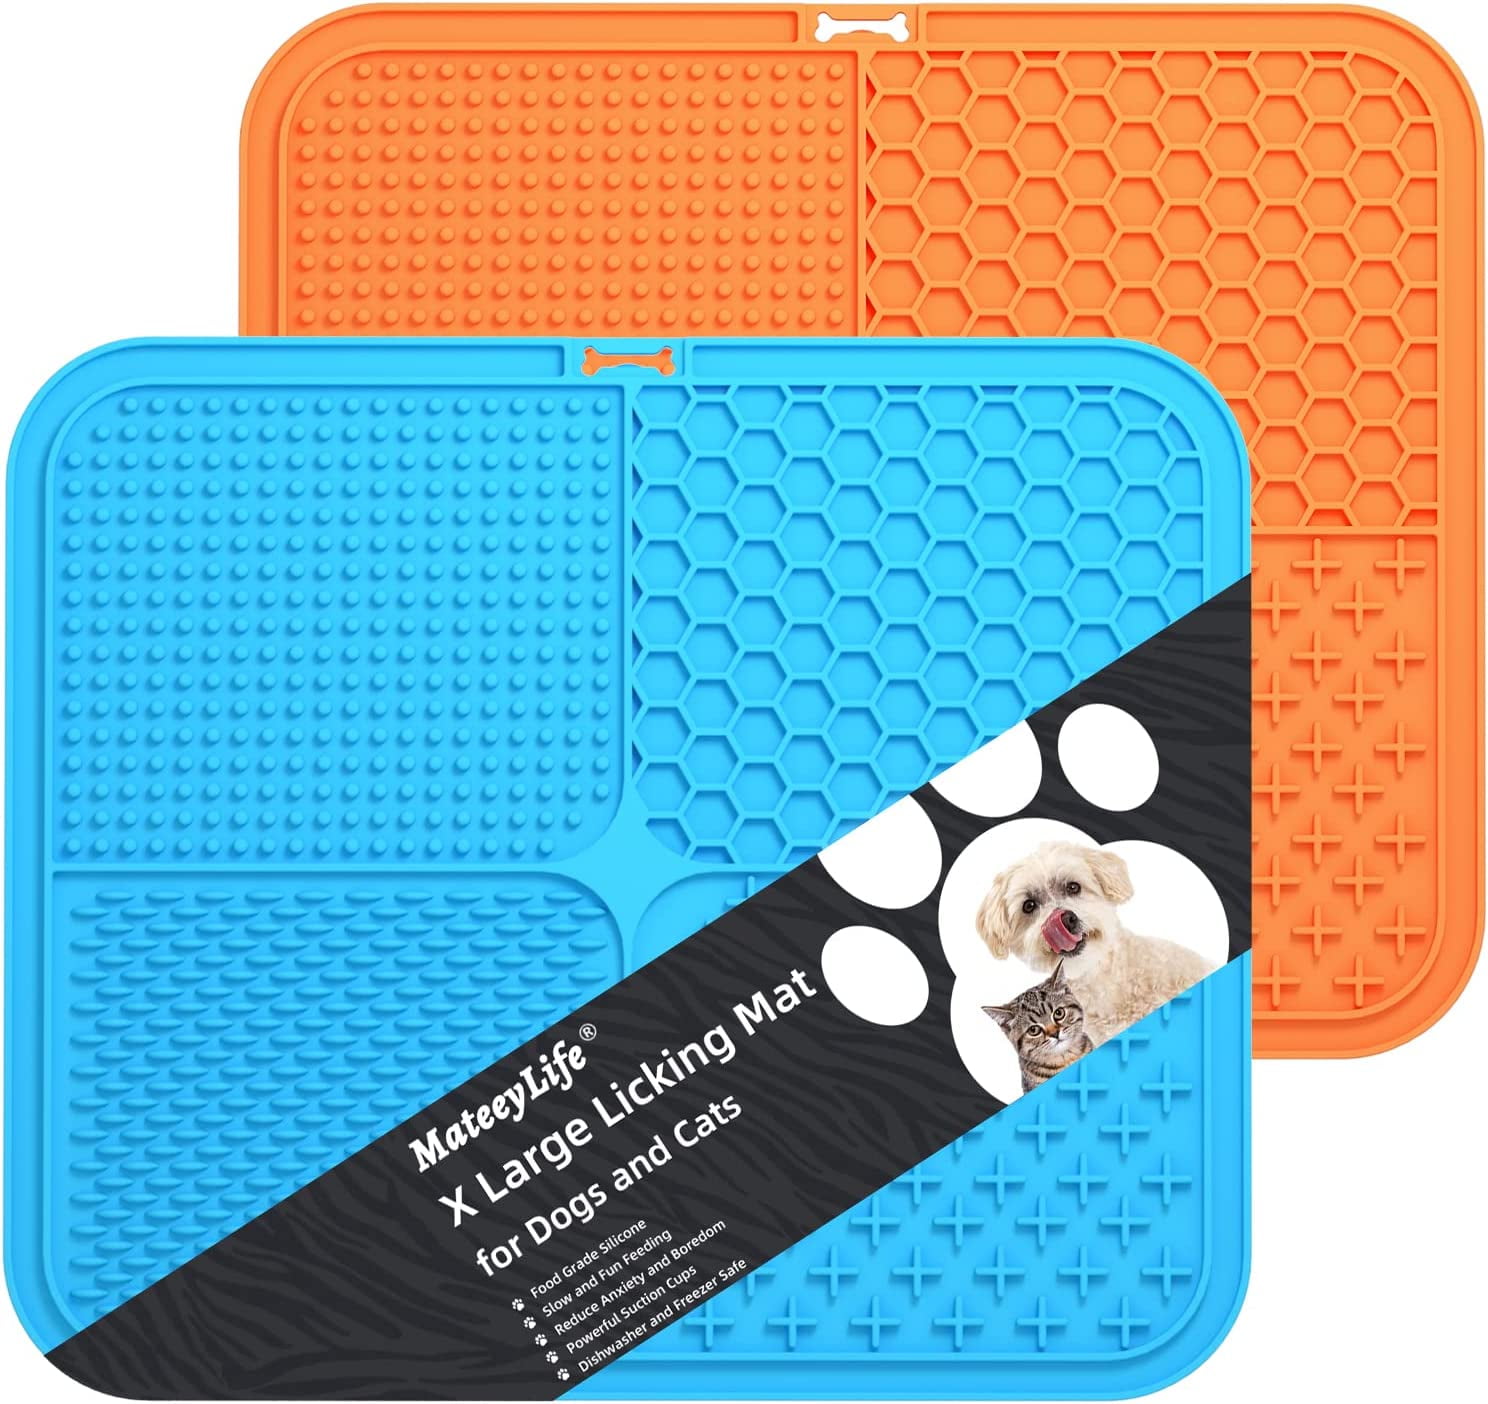 MateeyLife Large Lick Mat for Dogs & Cats with Suction Cups, Lick matts for  Large Dogs Anxiety Relief, Cat Peanut Butter Lick Pad, Dog Enrichment Toys